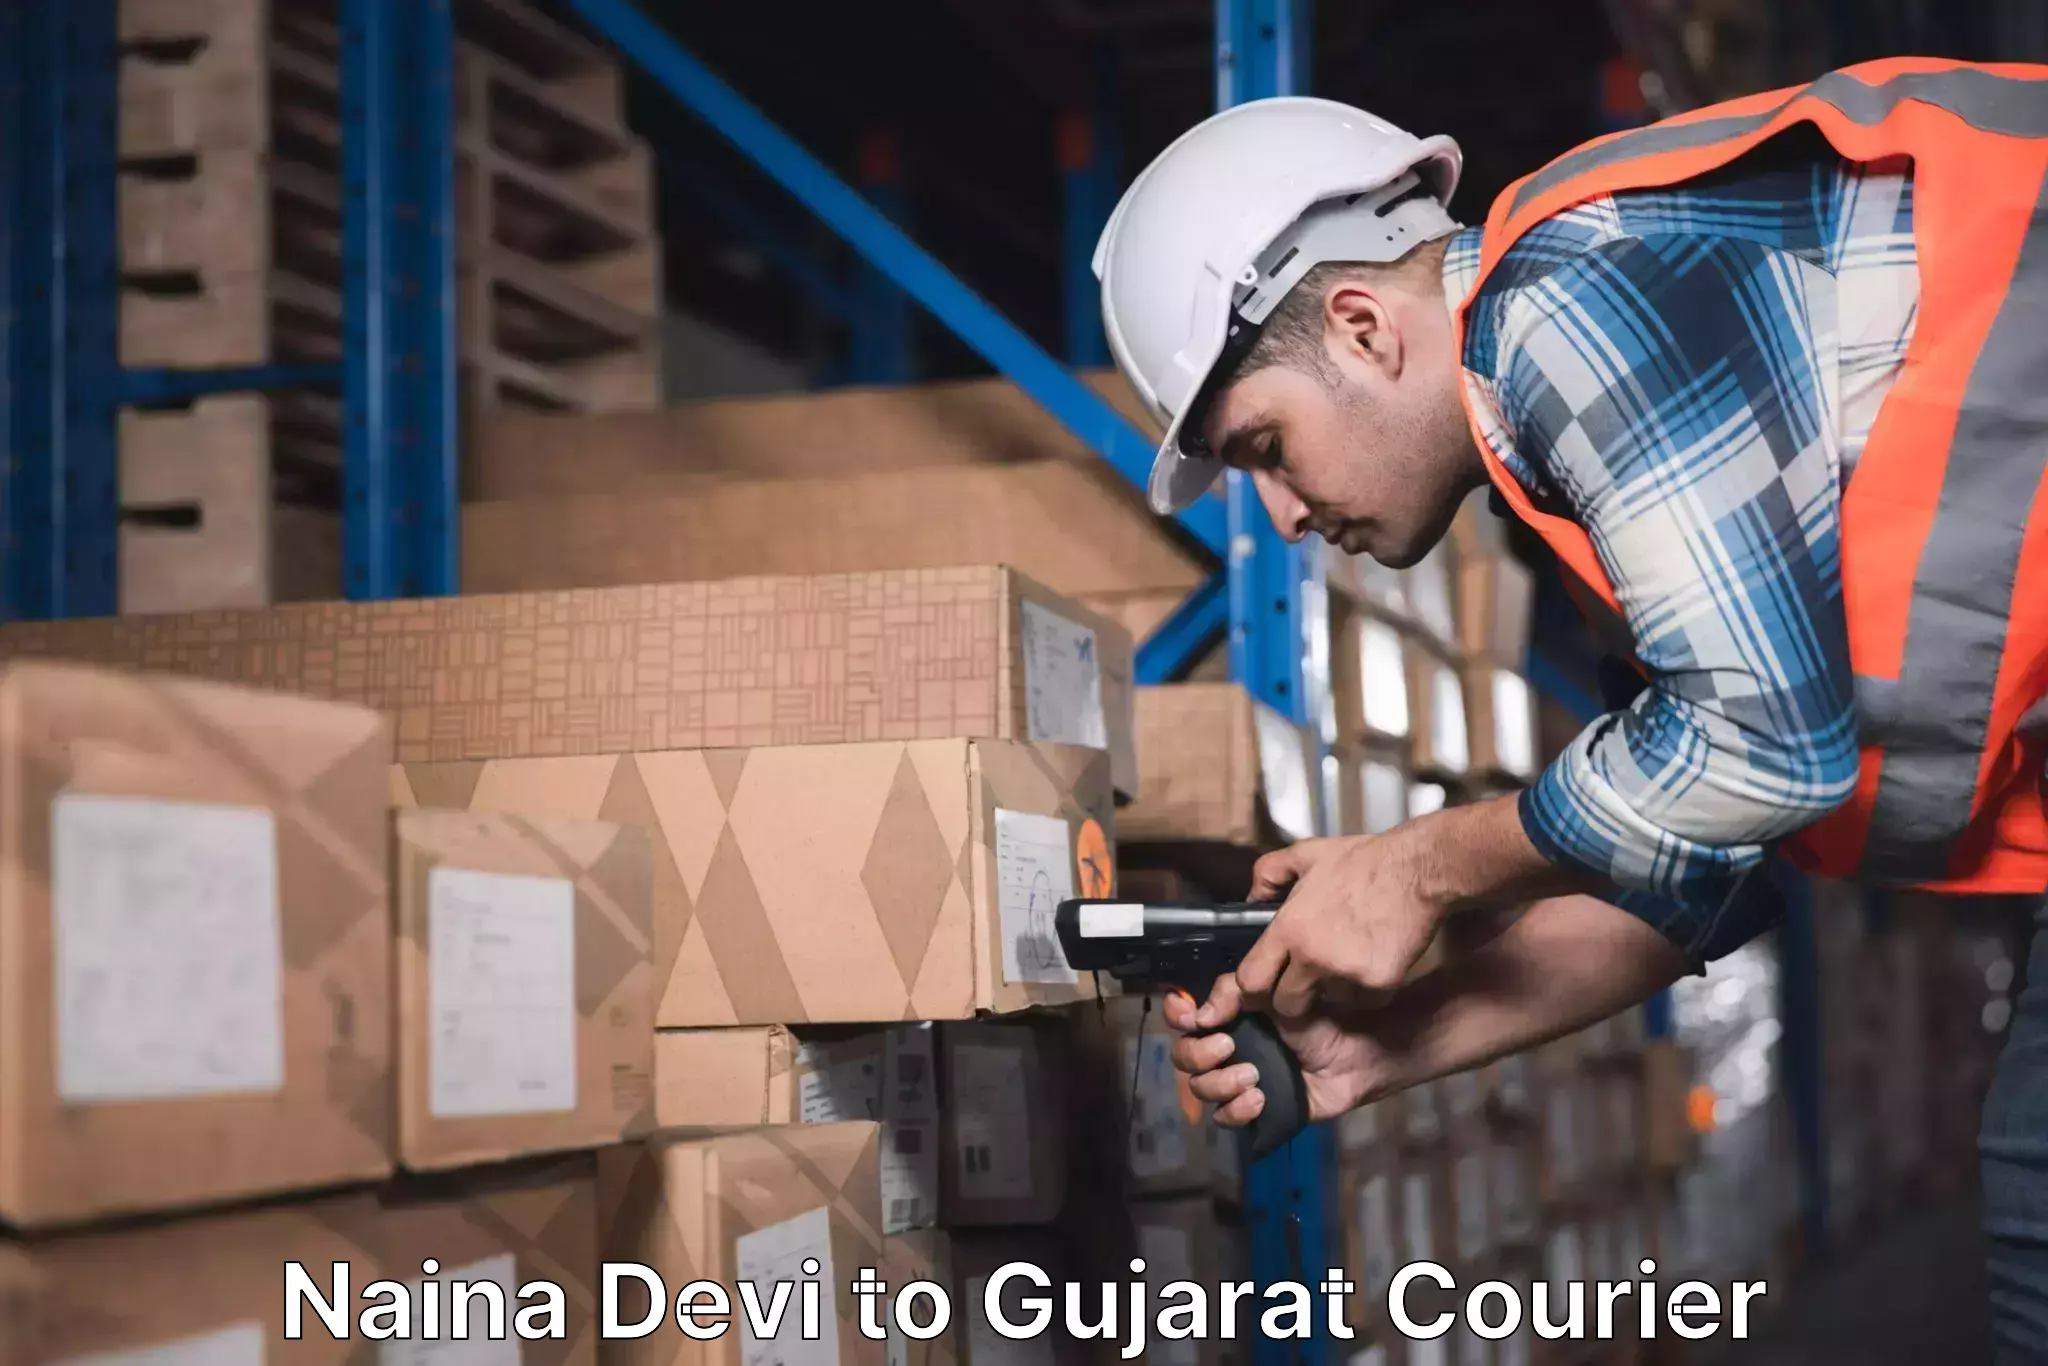 Nationwide delivery network Naina Devi to Gujarat